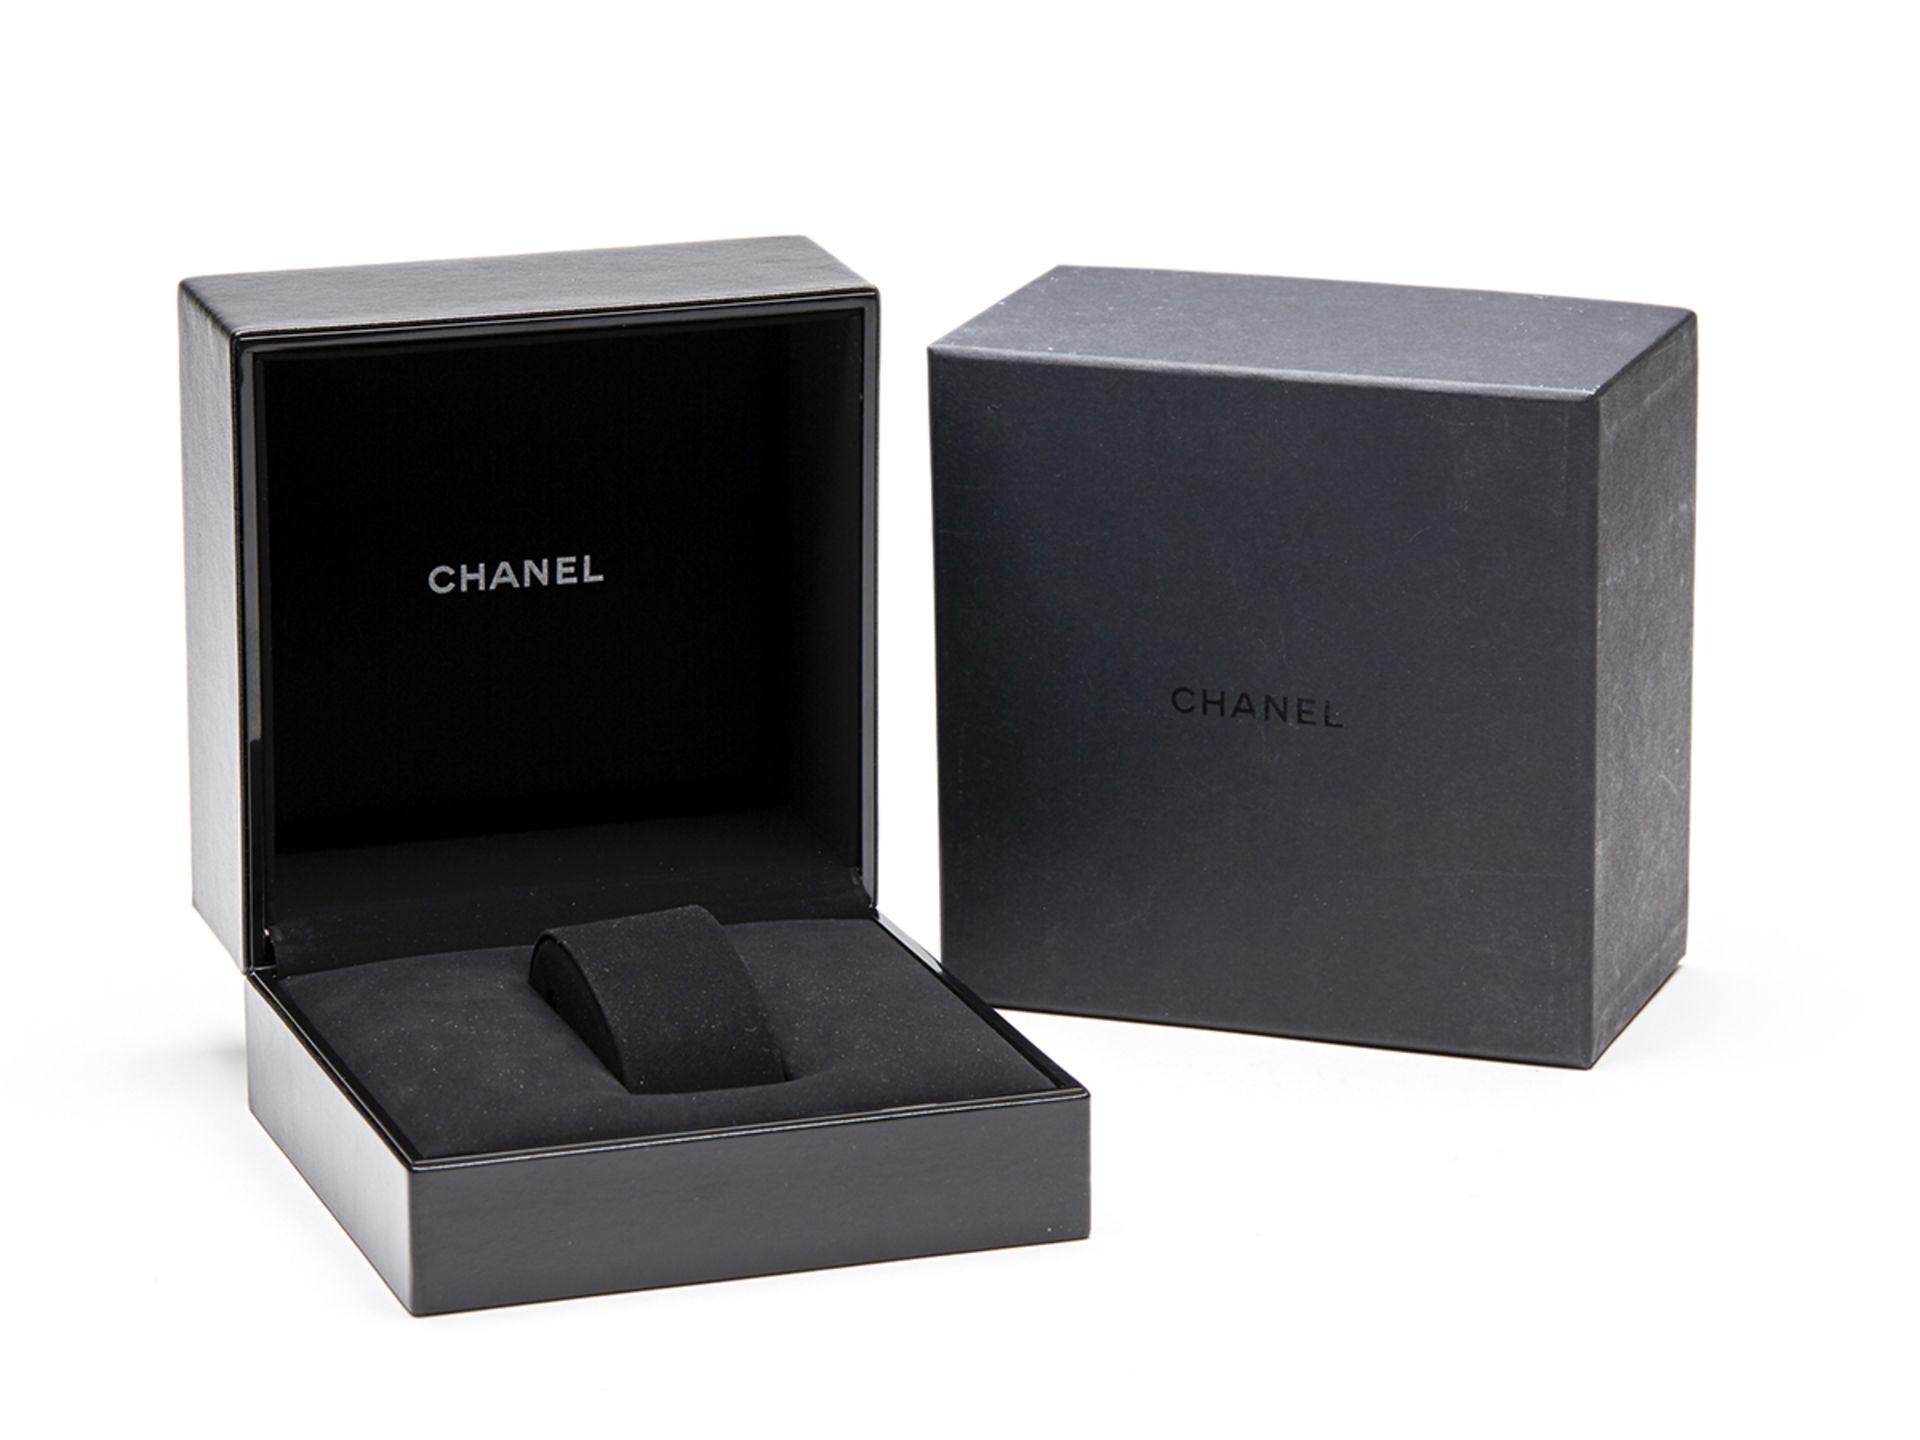 Chanel Madmoiselle 22mm Platinum ***Reserve reduced*** - Image 9 of 9